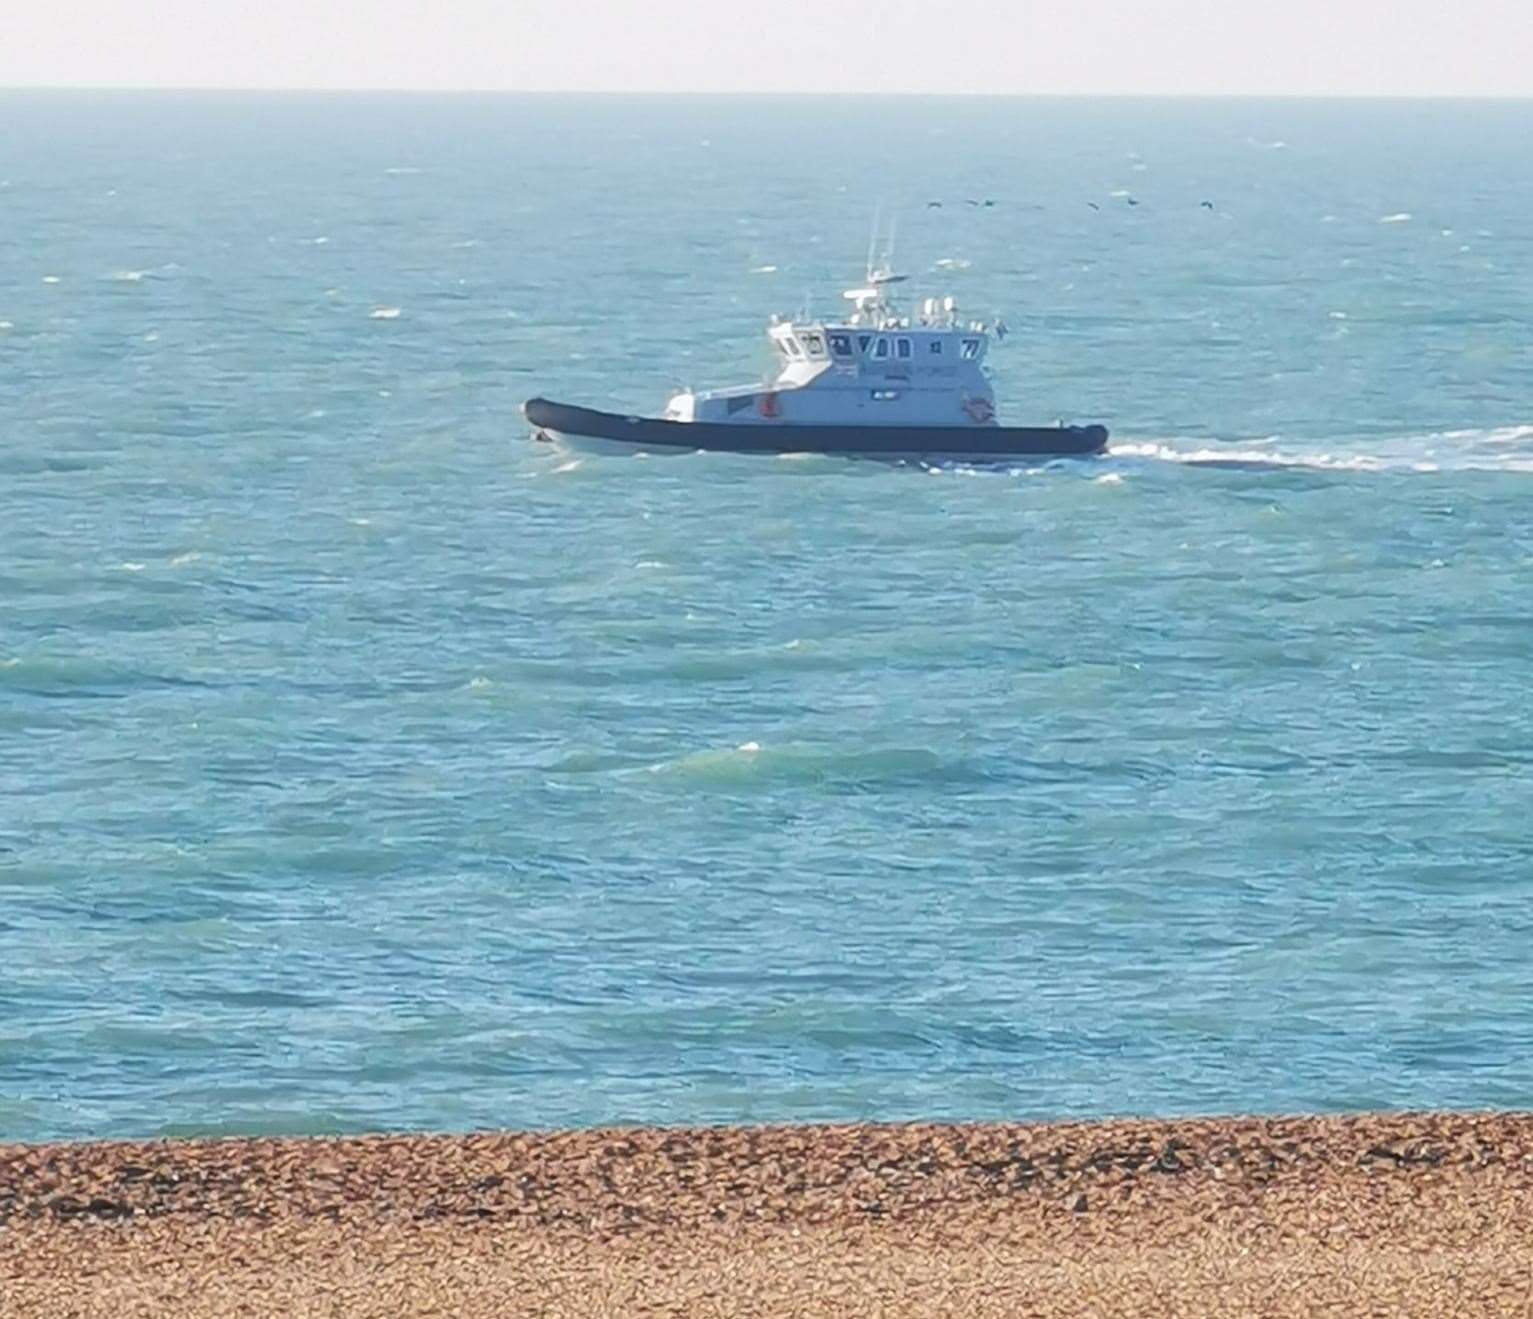 Border Force are at the scene in Folkestone